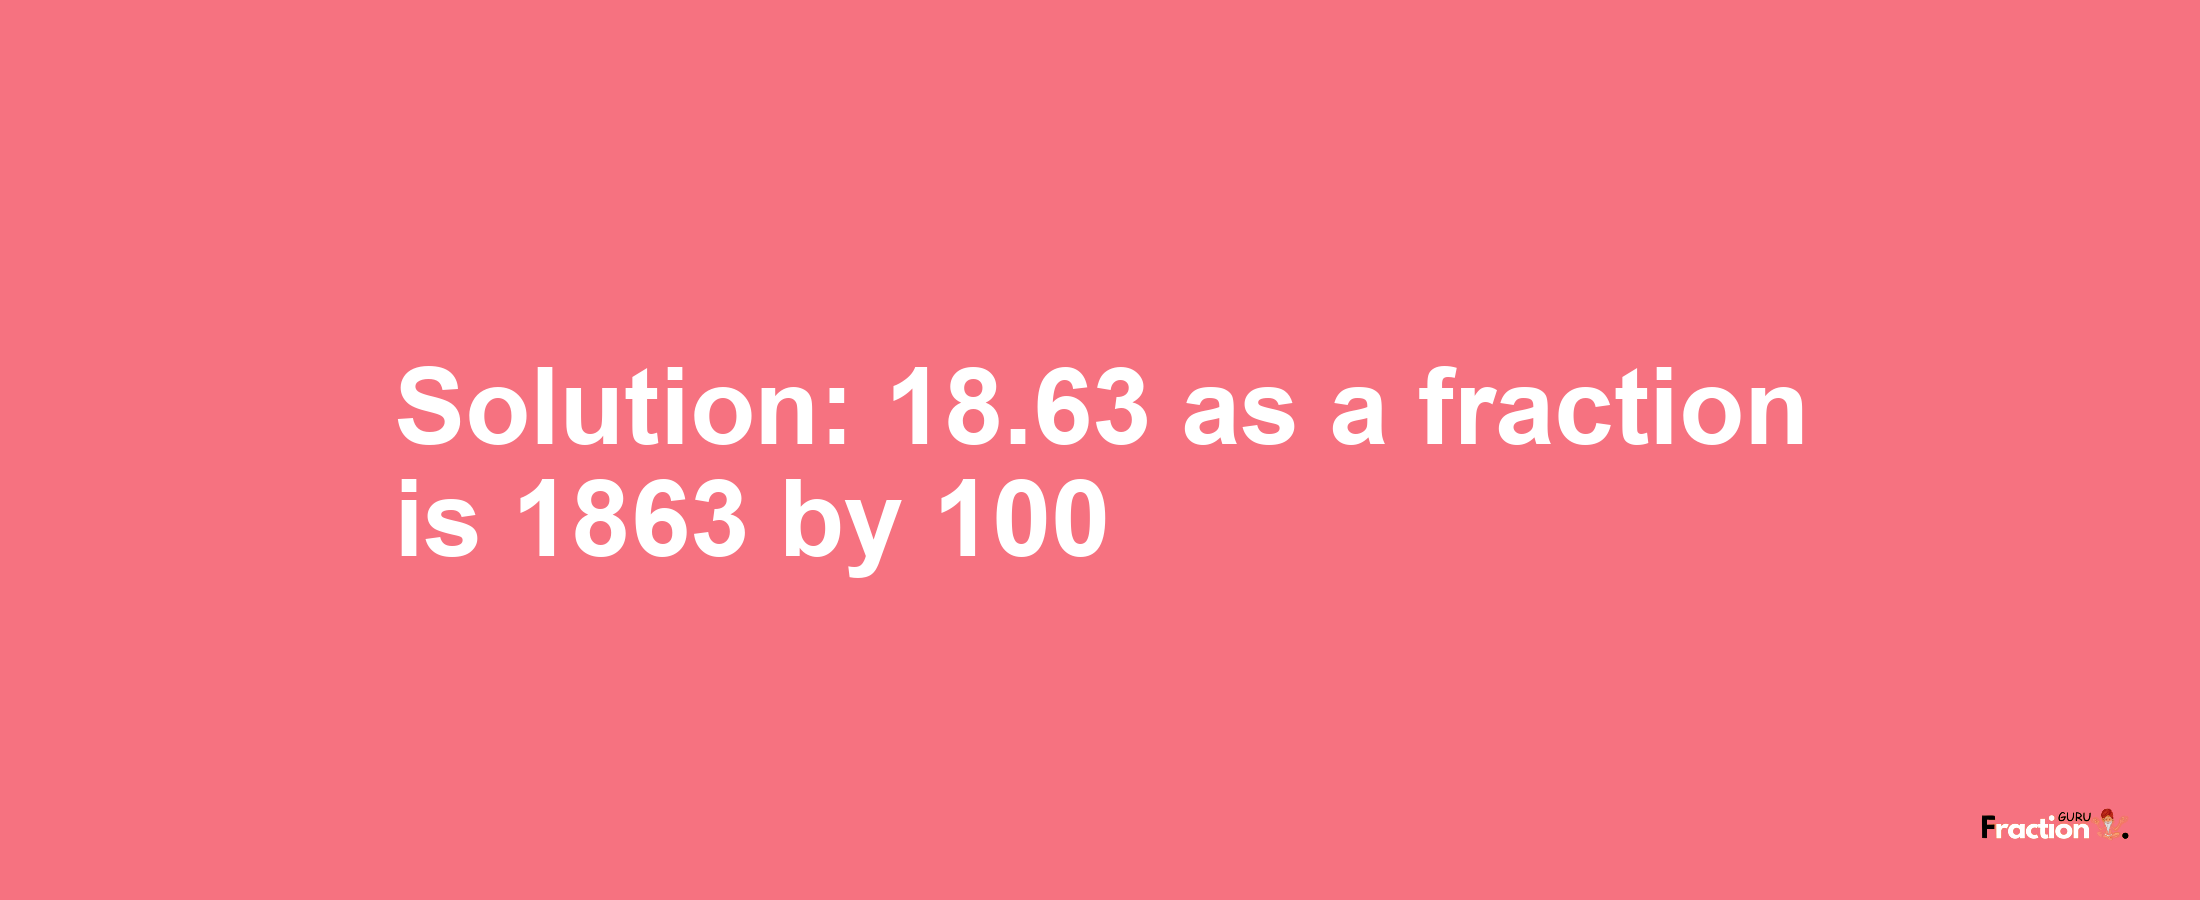 Solution:18.63 as a fraction is 1863/100